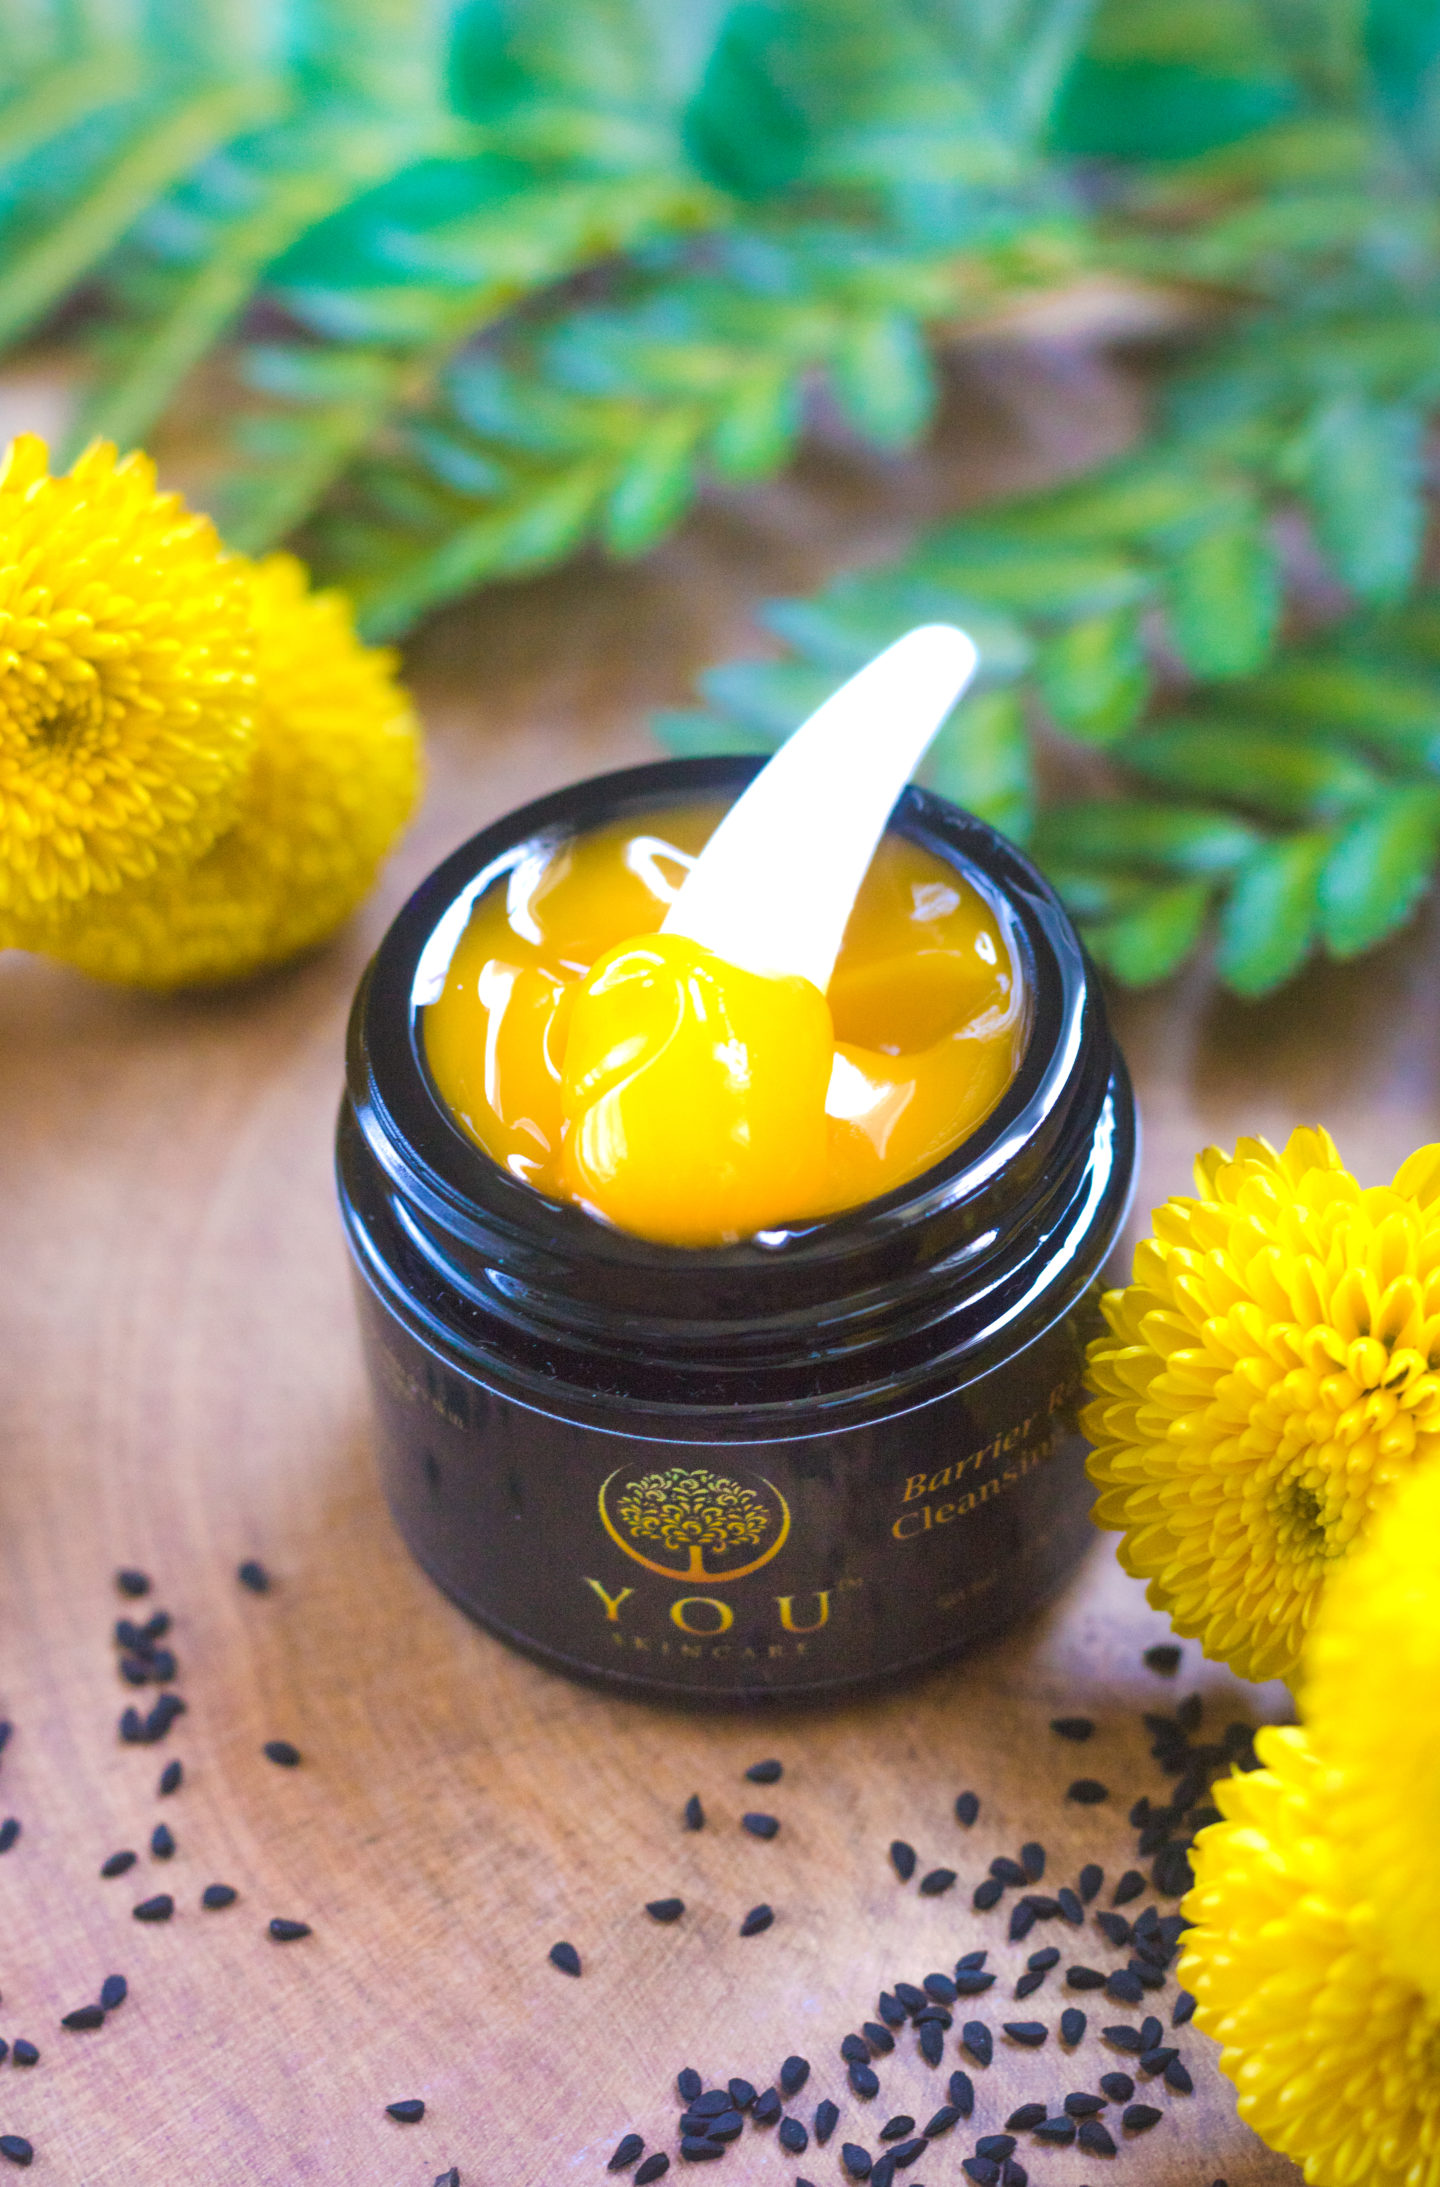 YOU Skincare-Barrier Repair Cleansing Balm